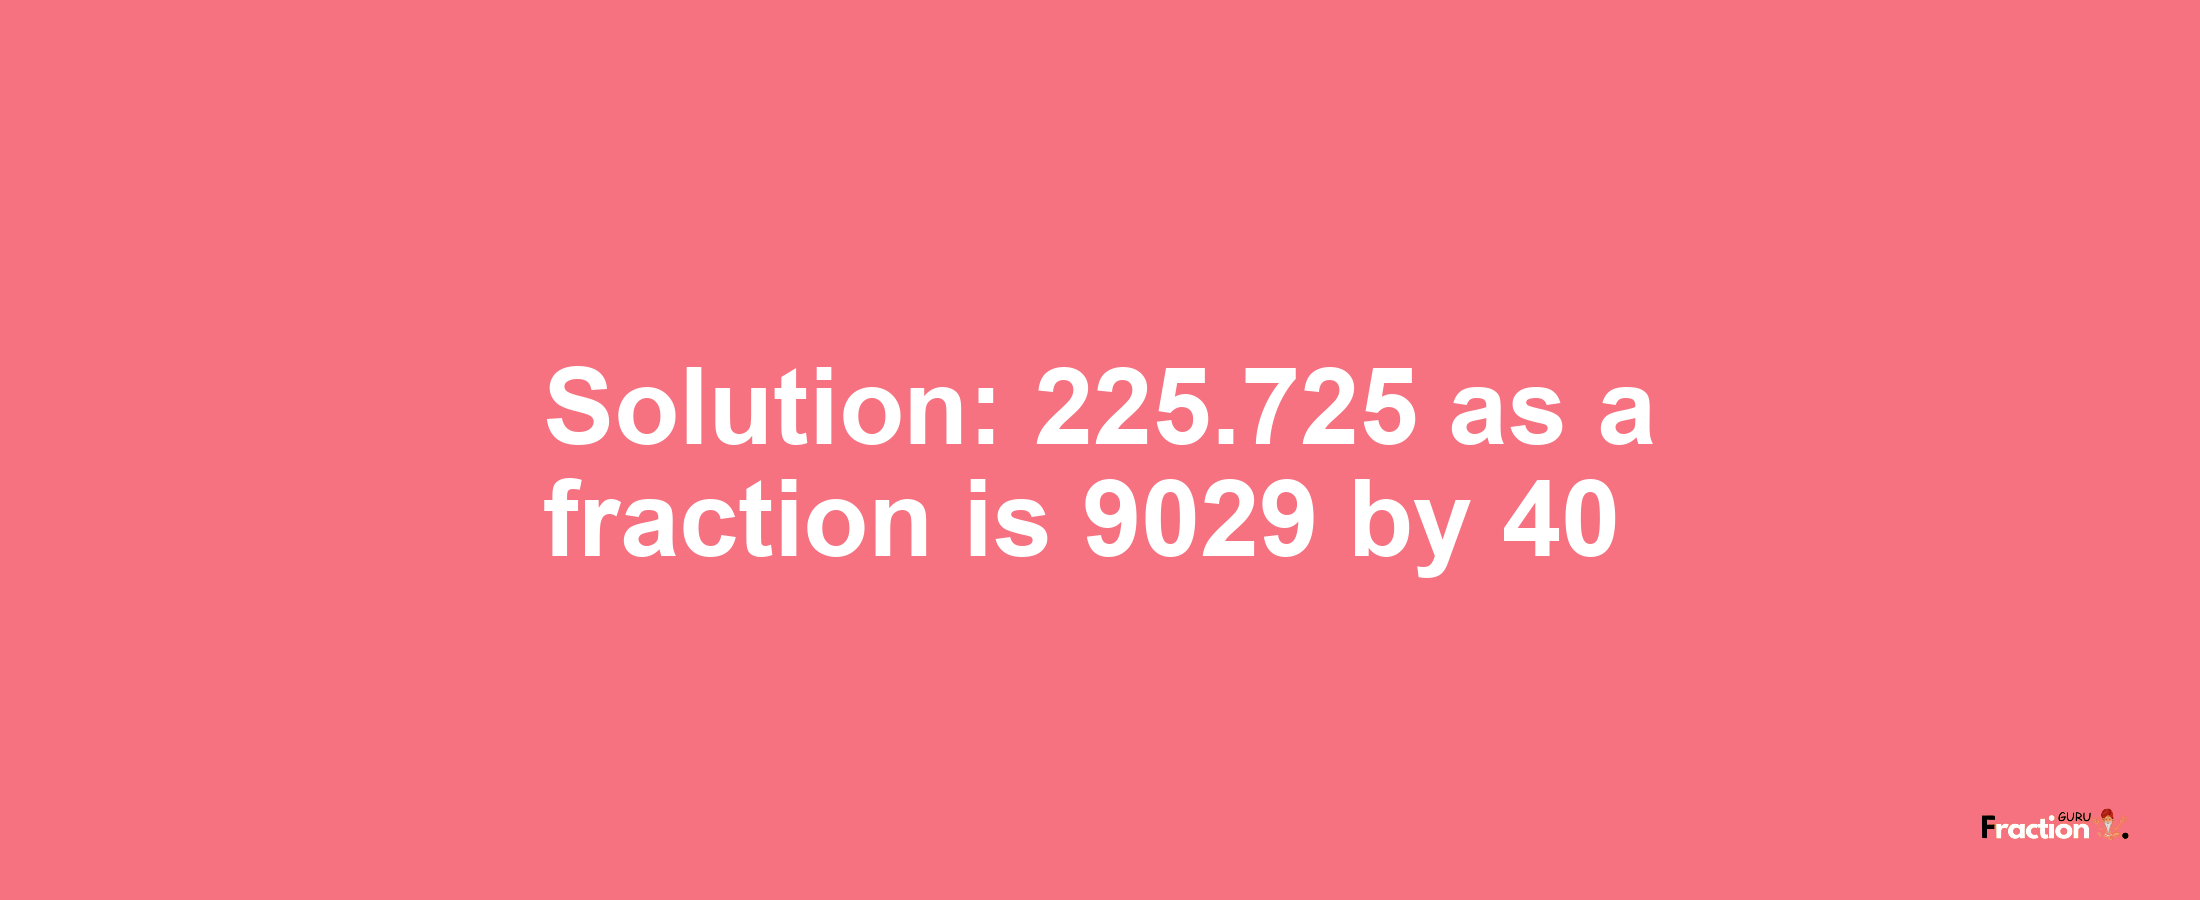 Solution:225.725 as a fraction is 9029/40